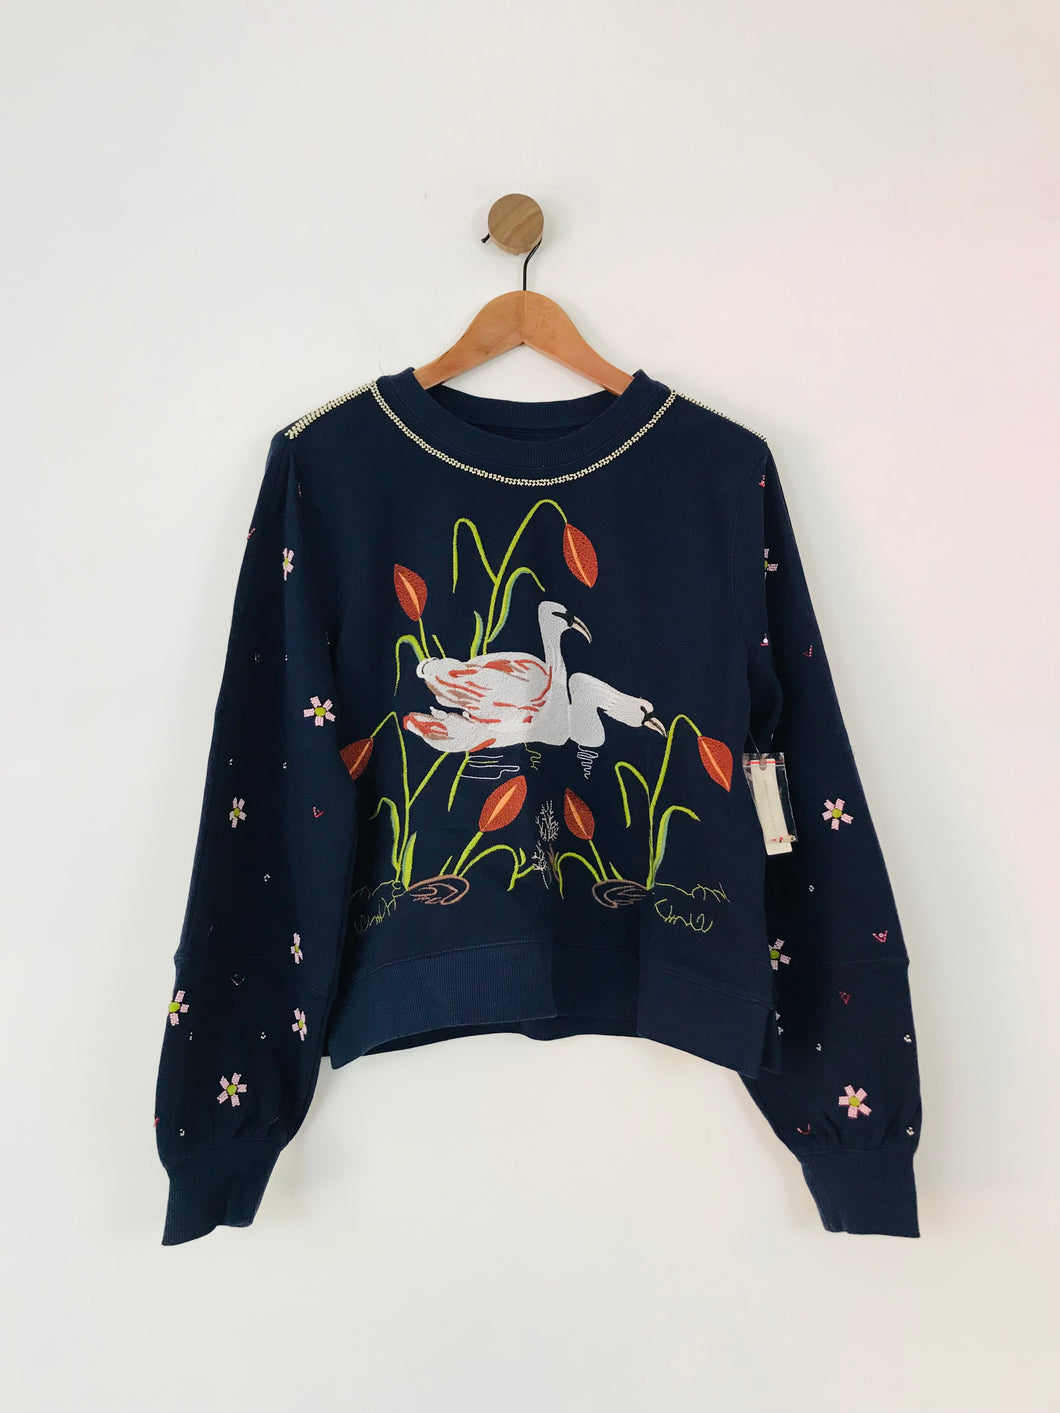 Anthropologie Women's Embroidered Jumper NWT | M UK10-12 | Blue